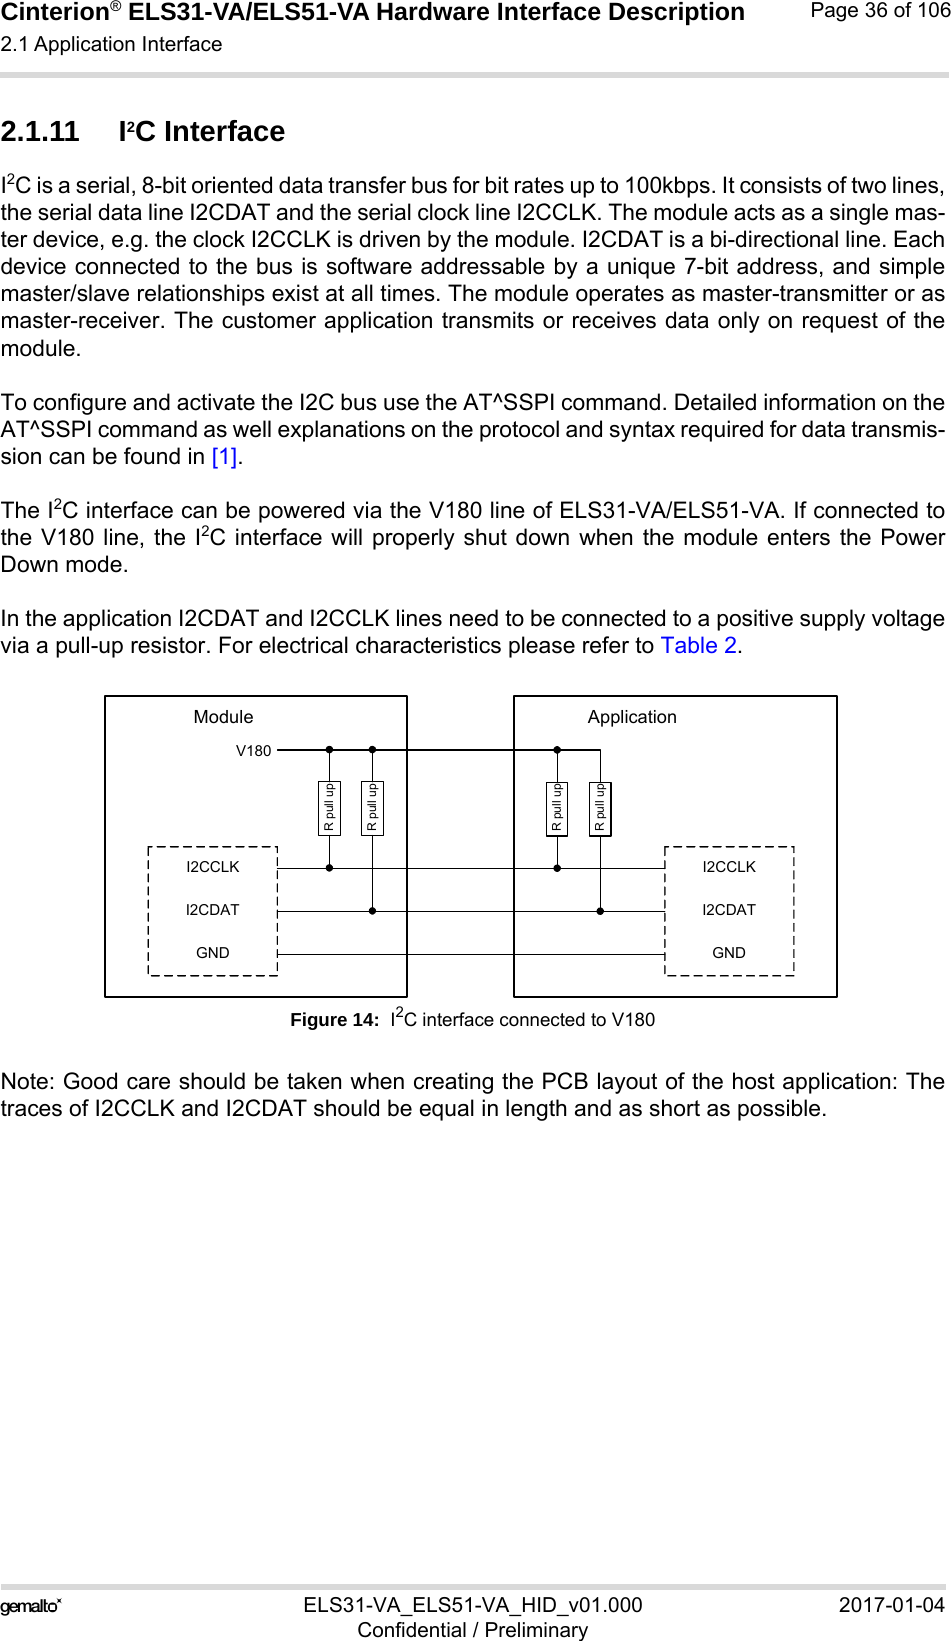 Cinterion® ELS31-VA/ELS51-VA Hardware Interface Description2.1 Application Interface56ELS31-VA_ELS51-VA_HID_v01.000 2017-01-04Confidential / PreliminaryPage 36 of 1062.1.11 I2C InterfaceI2C is a serial, 8-bit oriented data transfer bus for bit rates up to 100kbps. It consists of two lines,the serial data line I2CDAT and the serial clock line I2CCLK. The module acts as a single mas-ter device, e.g. the clock I2CCLK is driven by the module. I2CDAT is a bi-directional line. Eachdevice connected to the bus is software addressable by a unique 7-bit address, and simplemaster/slave relationships exist at all times. The module operates as master-transmitter or asmaster-receiver. The customer application transmits or receives data only on request of themodule.To configure and activate the I2C bus use the AT^SSPI command. Detailed information on theAT^SSPI command as well explanations on the protocol and syntax required for data transmis-sion can be found in [1].The I2C interface can be powered via the V180 line of ELS31-VA/ELS51-VA. If connected tothe V180 line, the I2C interface will properly shut down when the module enters the PowerDown mode.In the application I2CDAT and I2CCLK lines need to be connected to a positive supply voltagevia a pull-up resistor. For electrical characteristics please refer to Table 2.Figure 14:  I2C interface connected to V180Note: Good care should be taken when creating the PCB layout of the host application: Thetraces of I2CCLK and I2CDAT should be equal in length and as short as possible.I2CCLKI2CDATGNDI2CCLKI2CDATGNDModule ApplicationV180R pull upR pull upR pull upR pull up